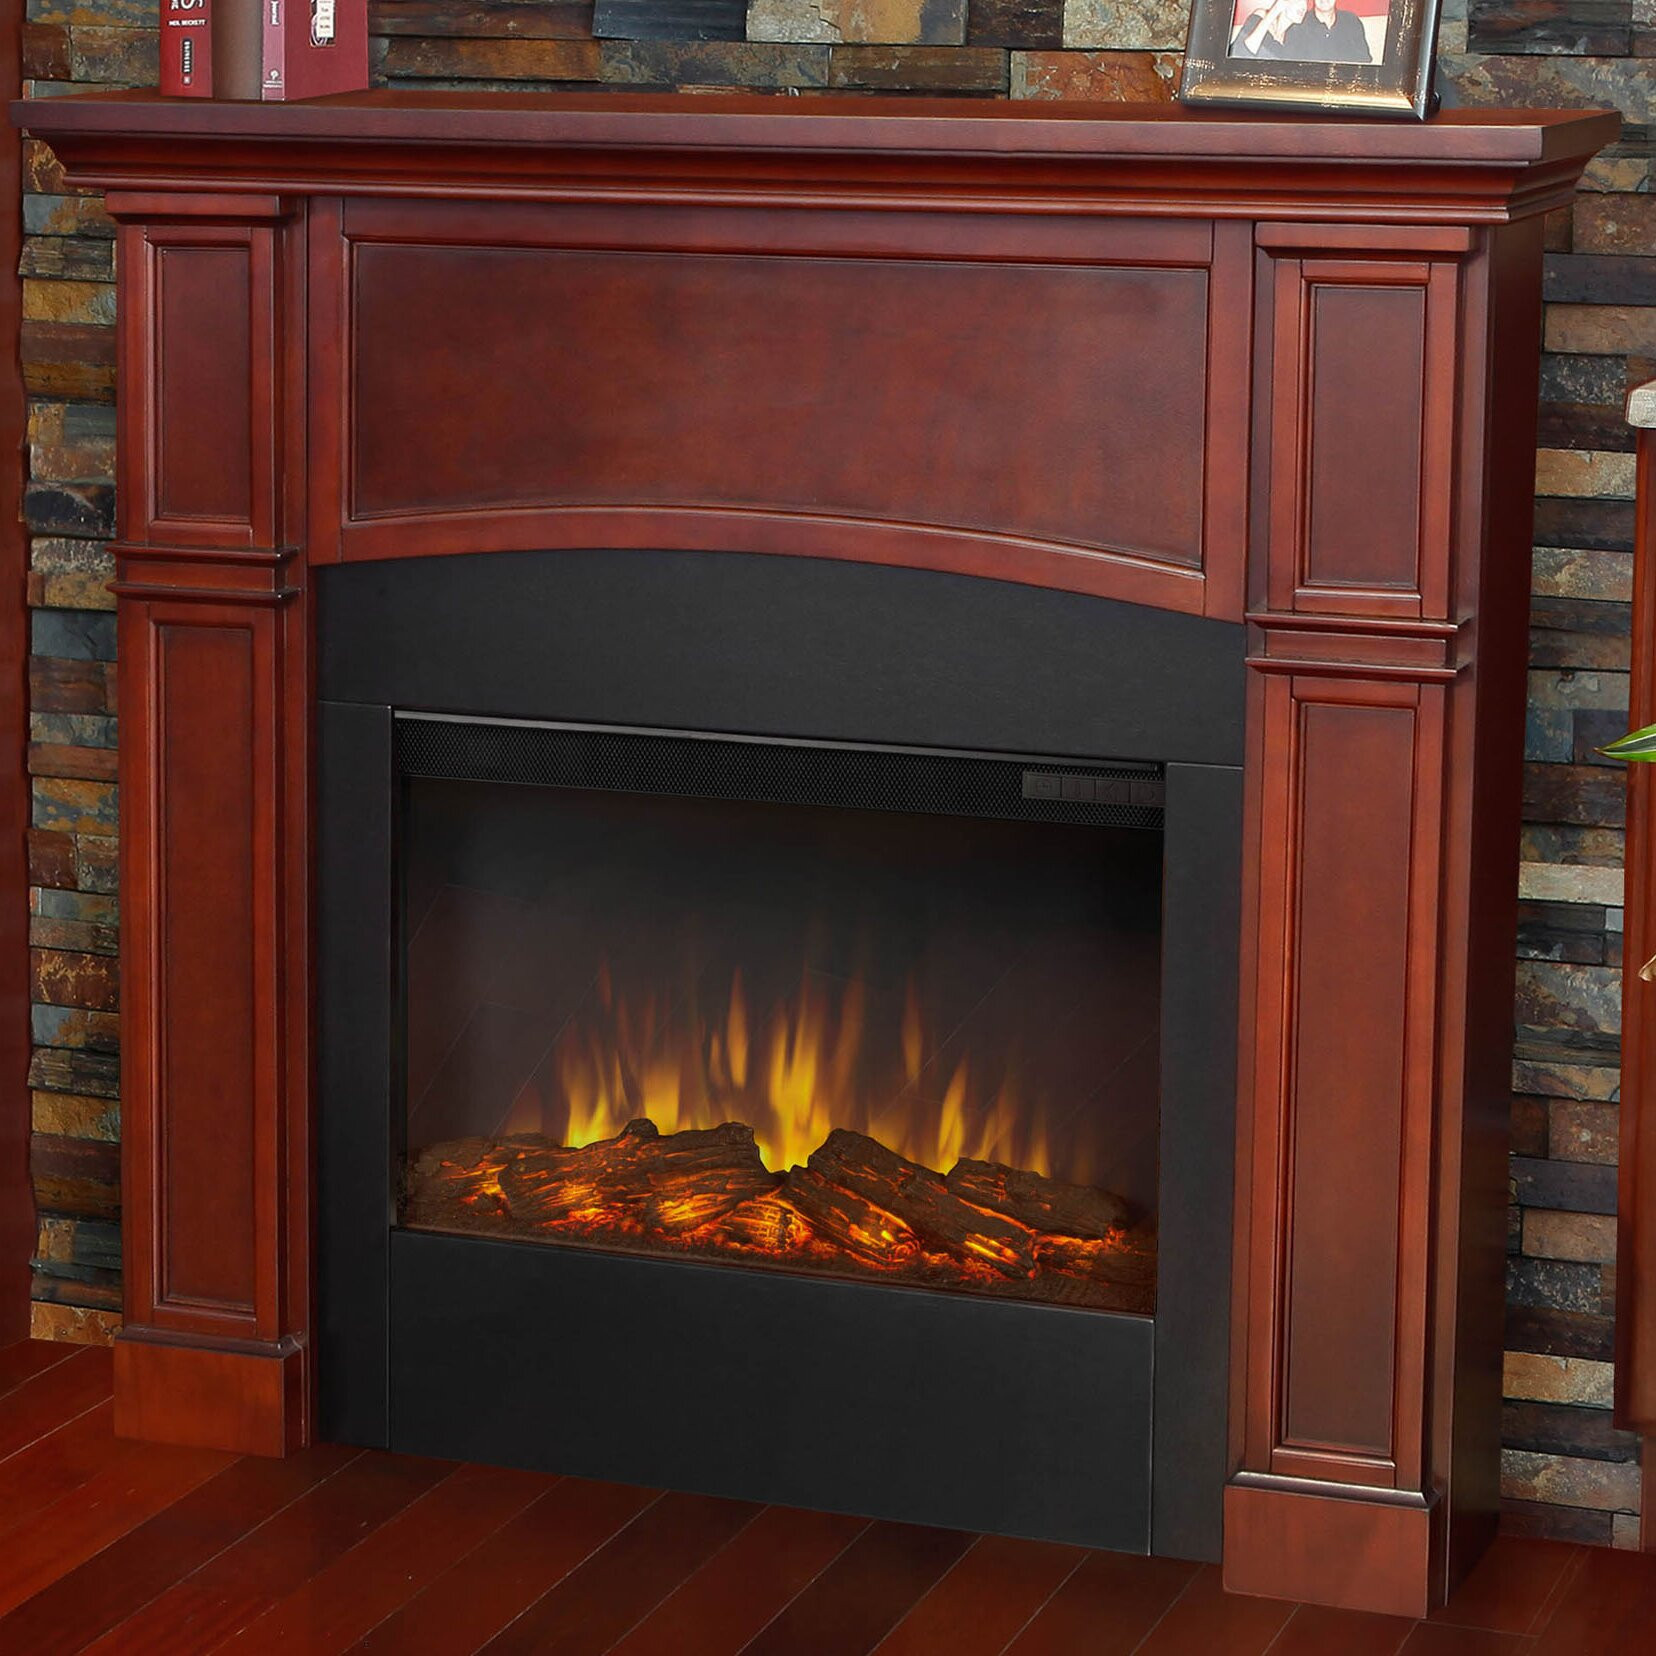 Real Flame Electric Fireplace Reviews
 Real Flame Slim Bradford Wall Mount Electric Fireplace